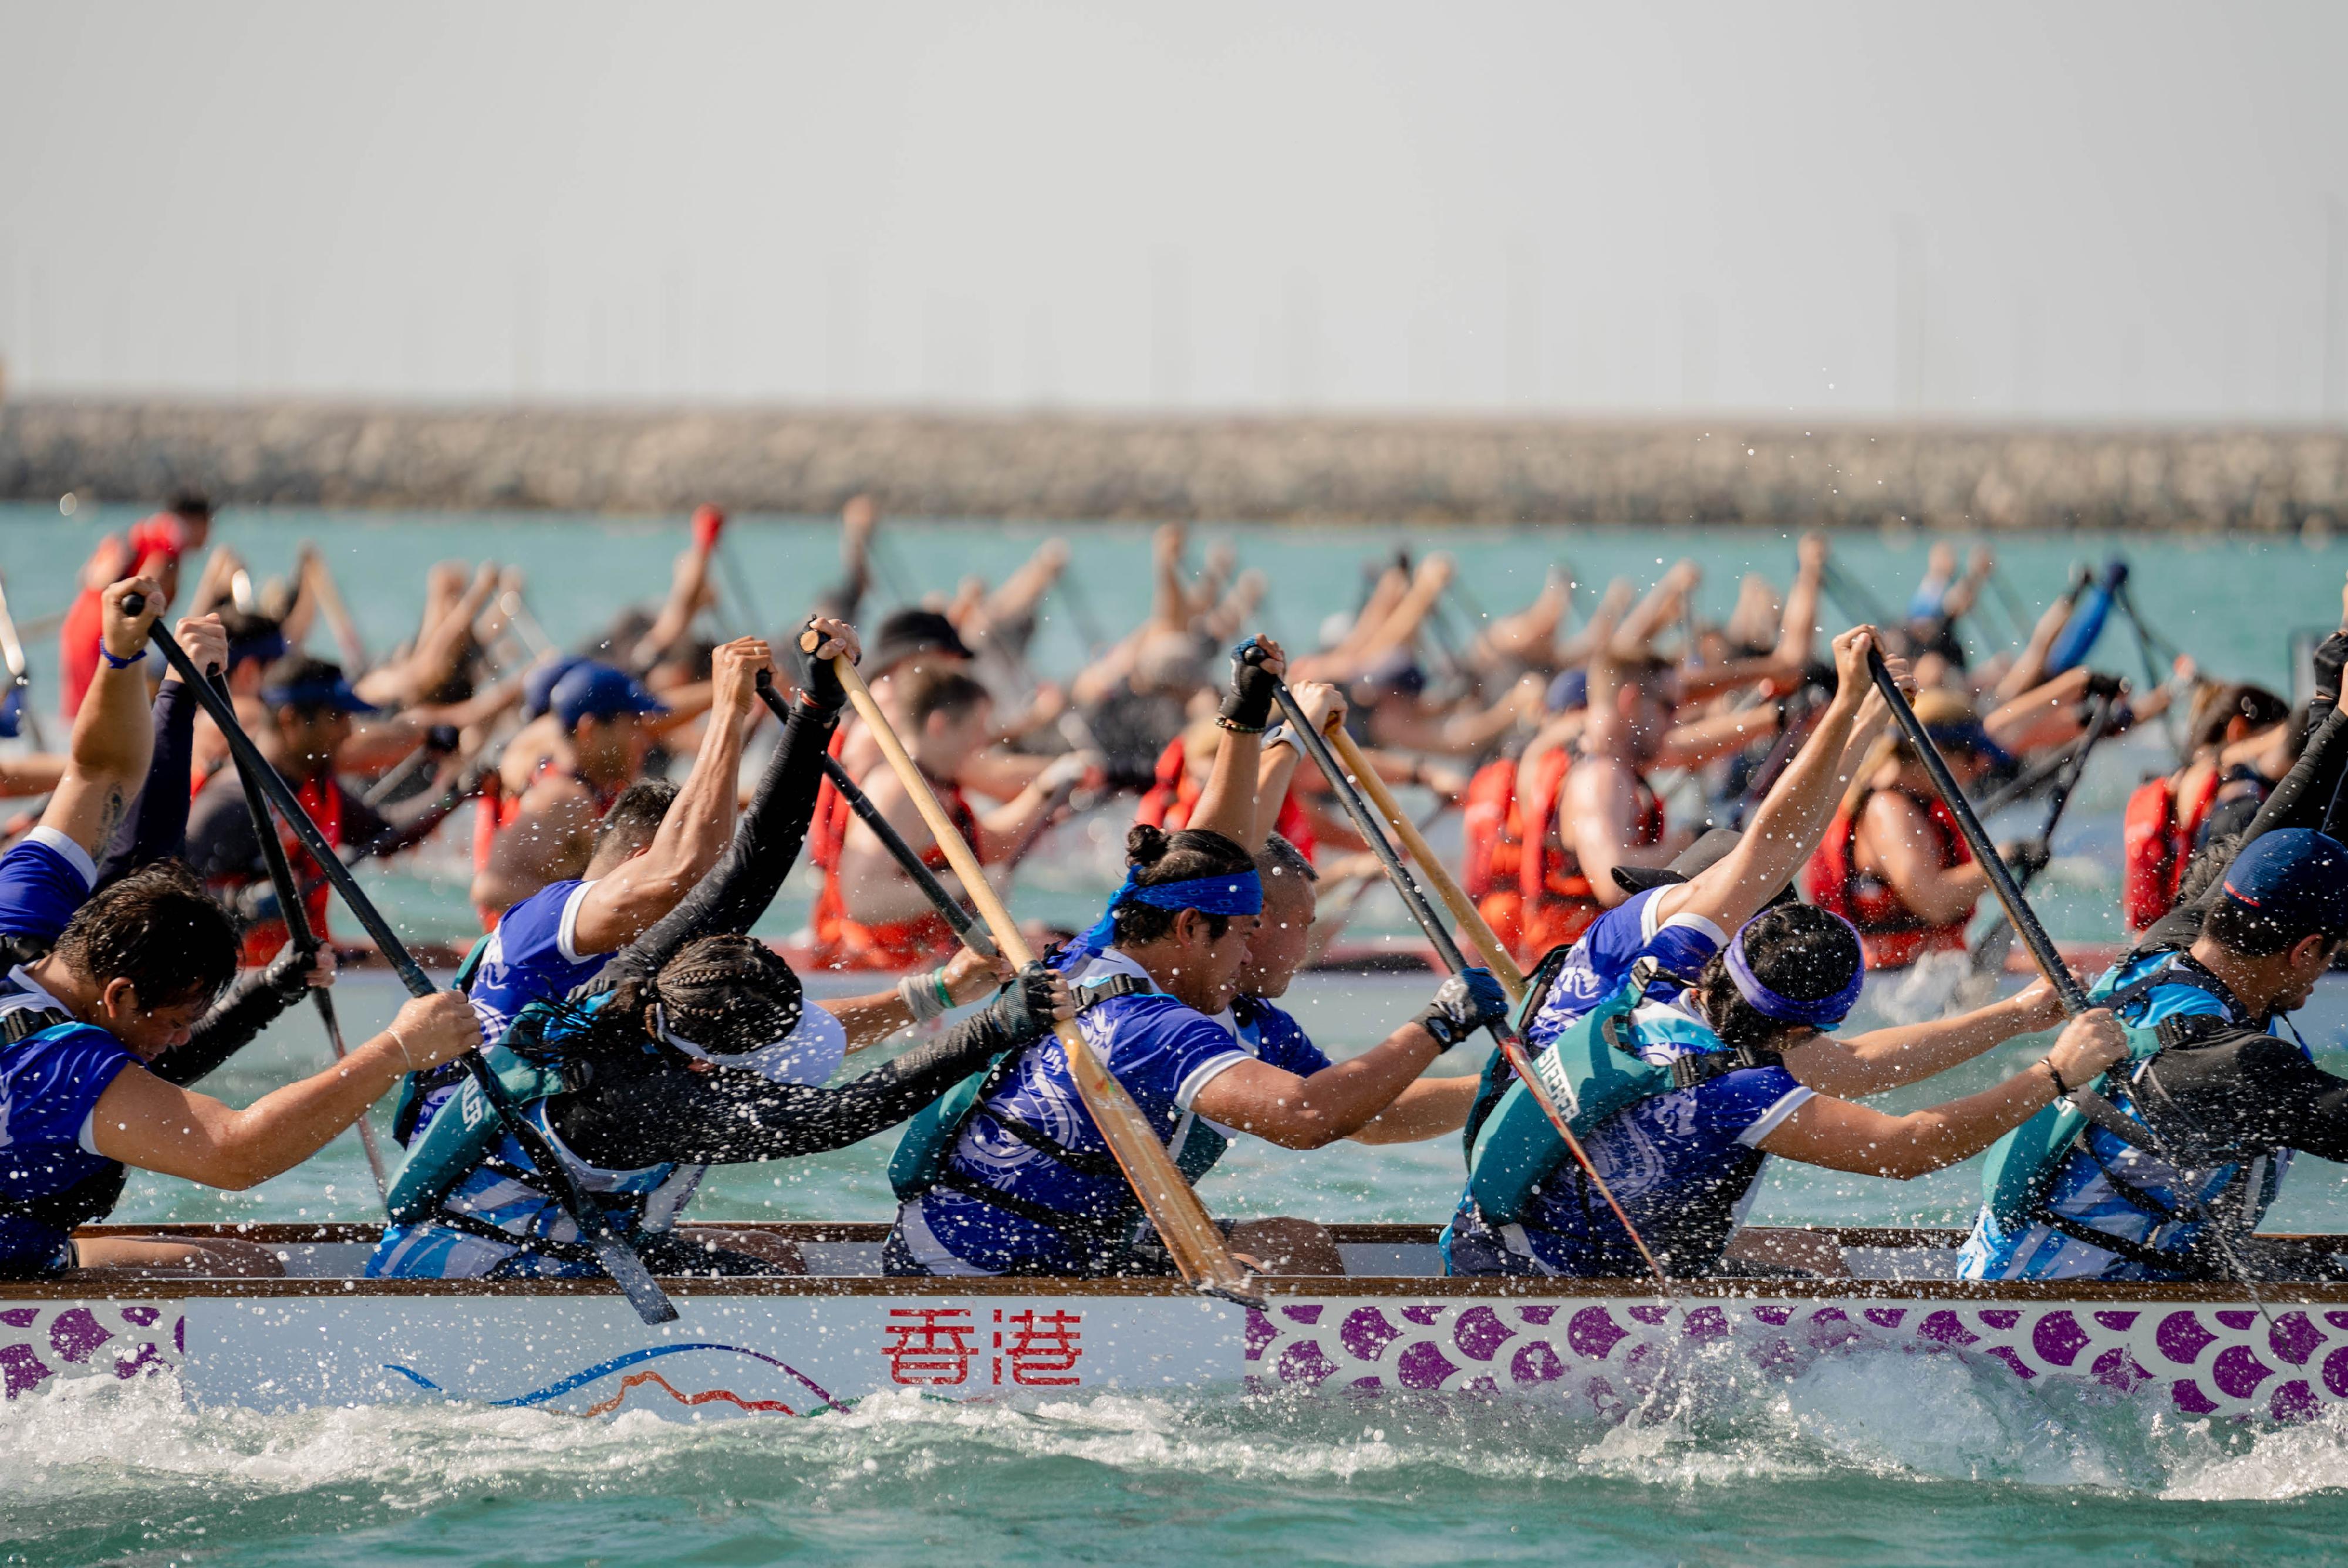 The first-ever Hong Kong Dragon Boat Festival in Dubai was held on October 8 and 9 (Dubai time) to celebrate the 25th anniversary of the establishment of the Hong Kong Special Administrative Region. There were 35 teams per day with a total of more than 1 200 competitors participating in different categories of races throughout the two-day event. 